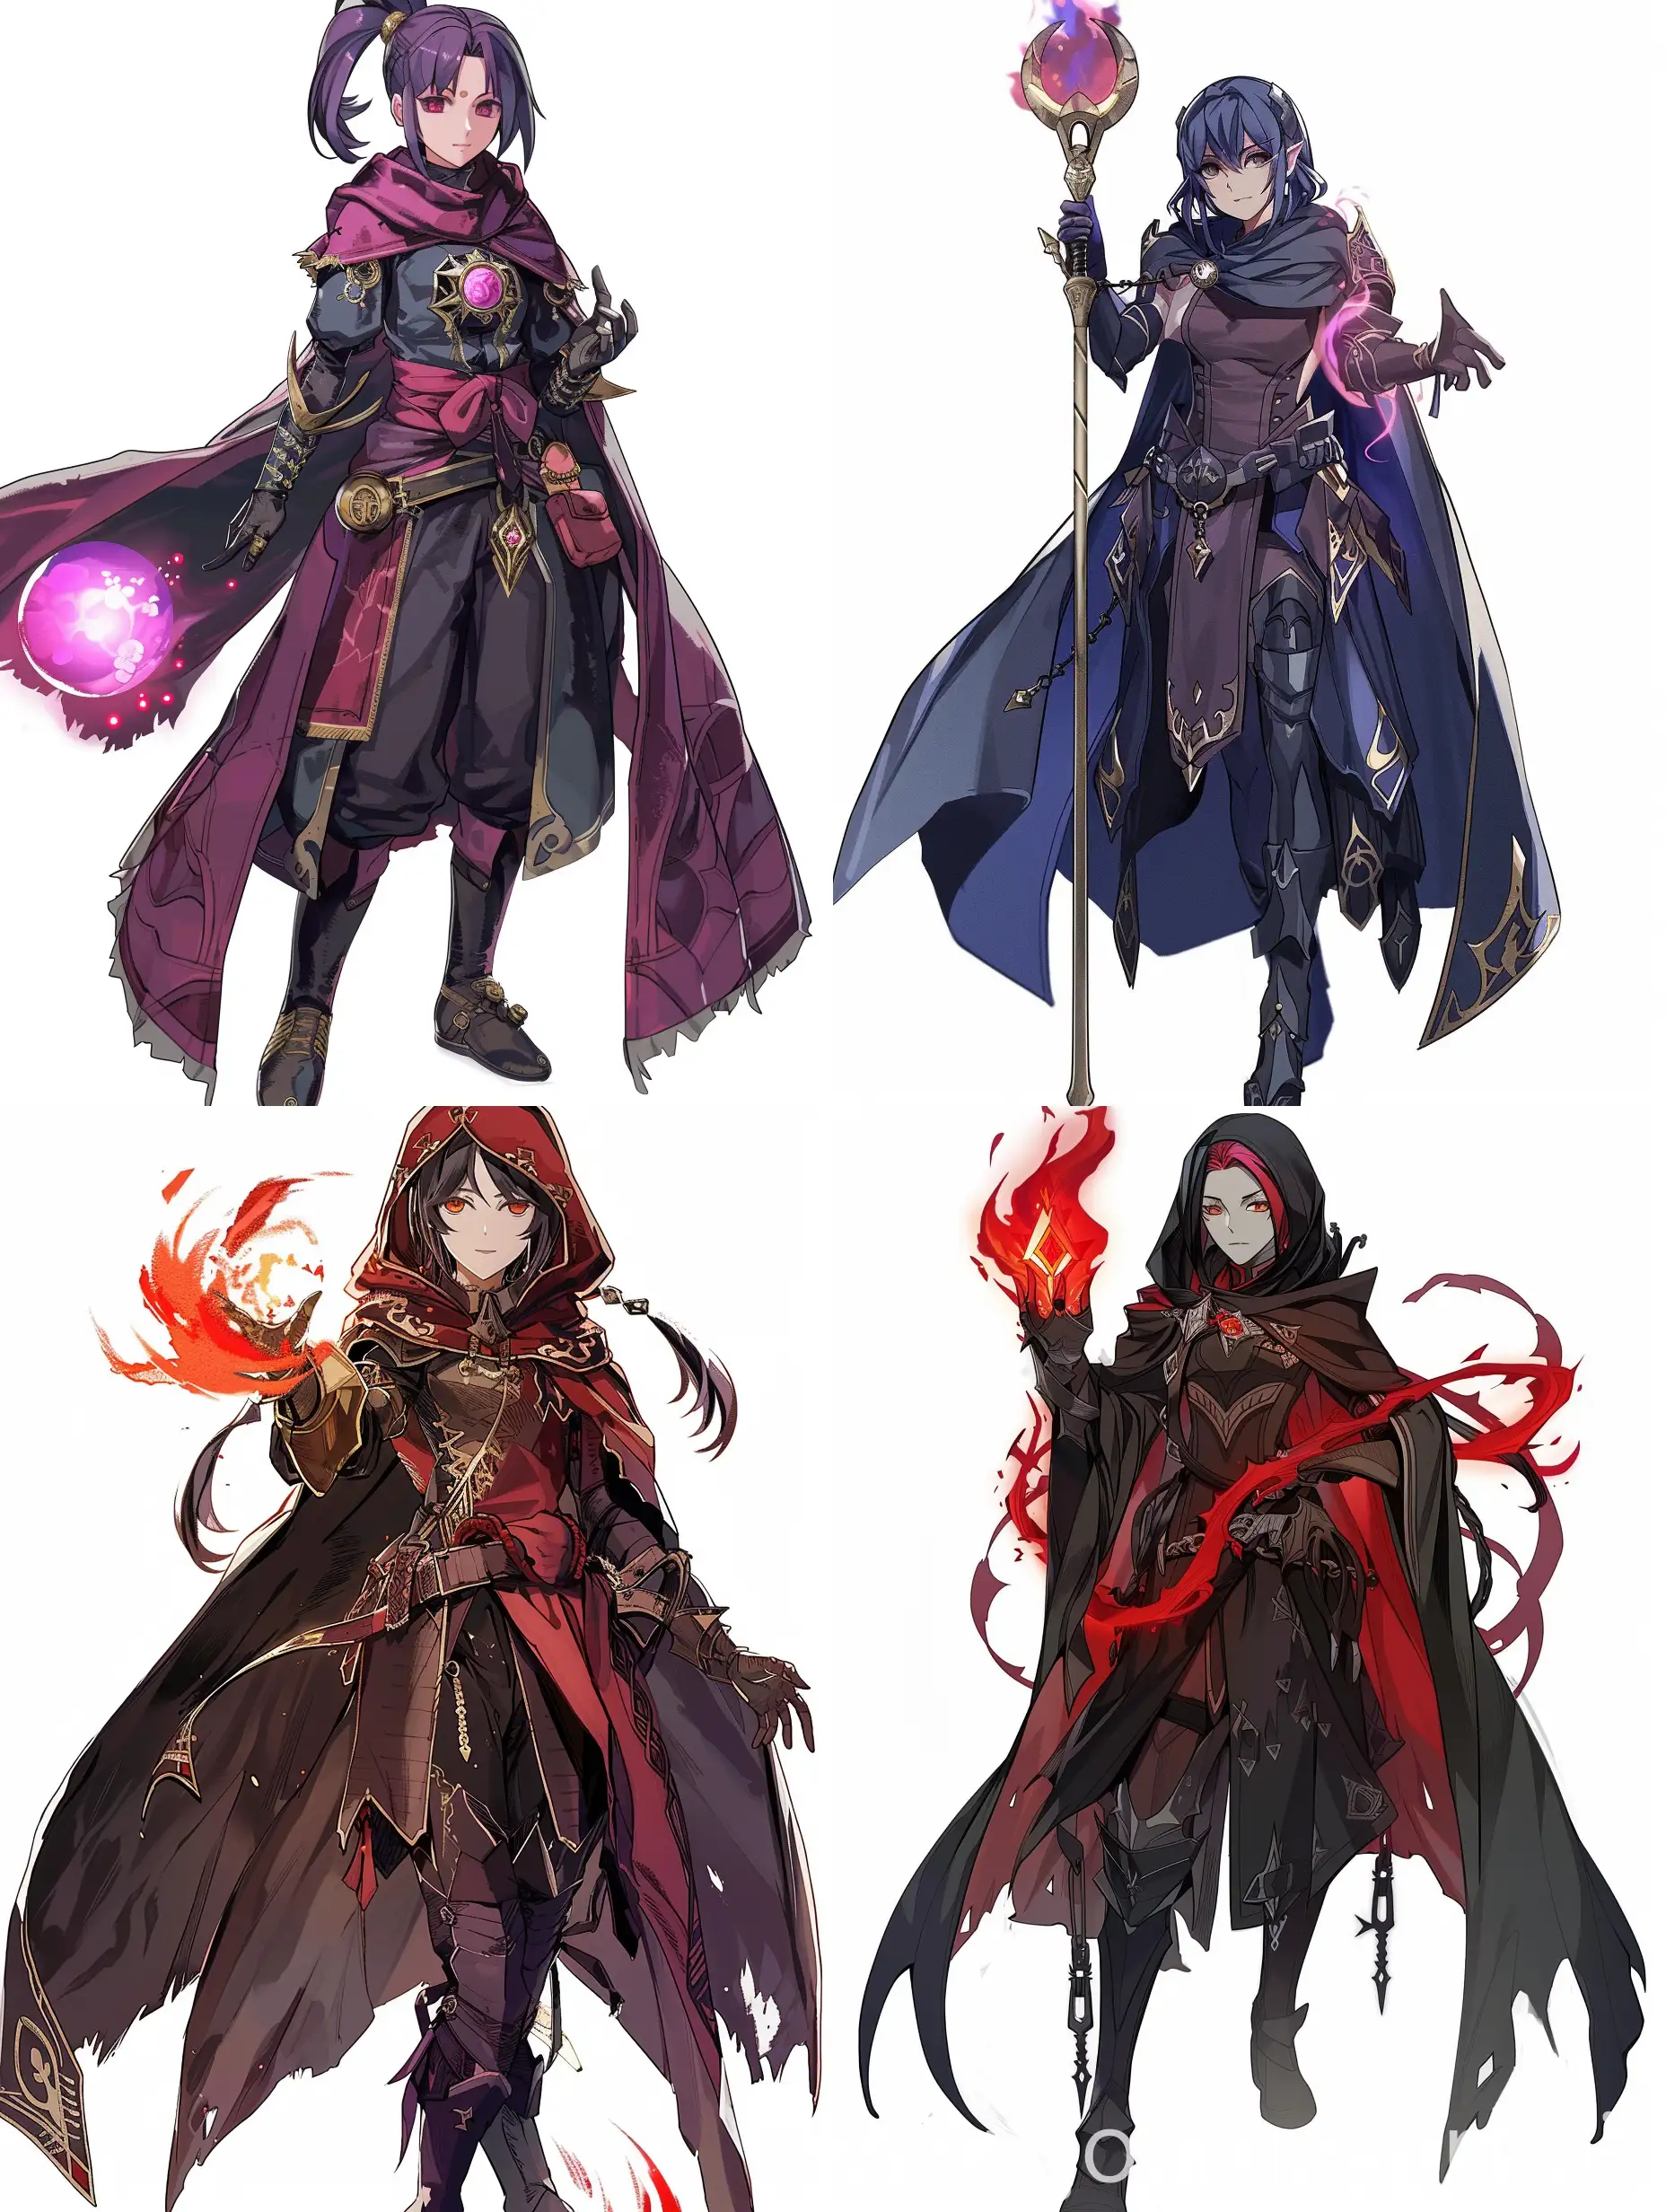 fire emblem character  for female dark mage looks similar to yoru from chainsaw man sage mage in the style of fire emblem,